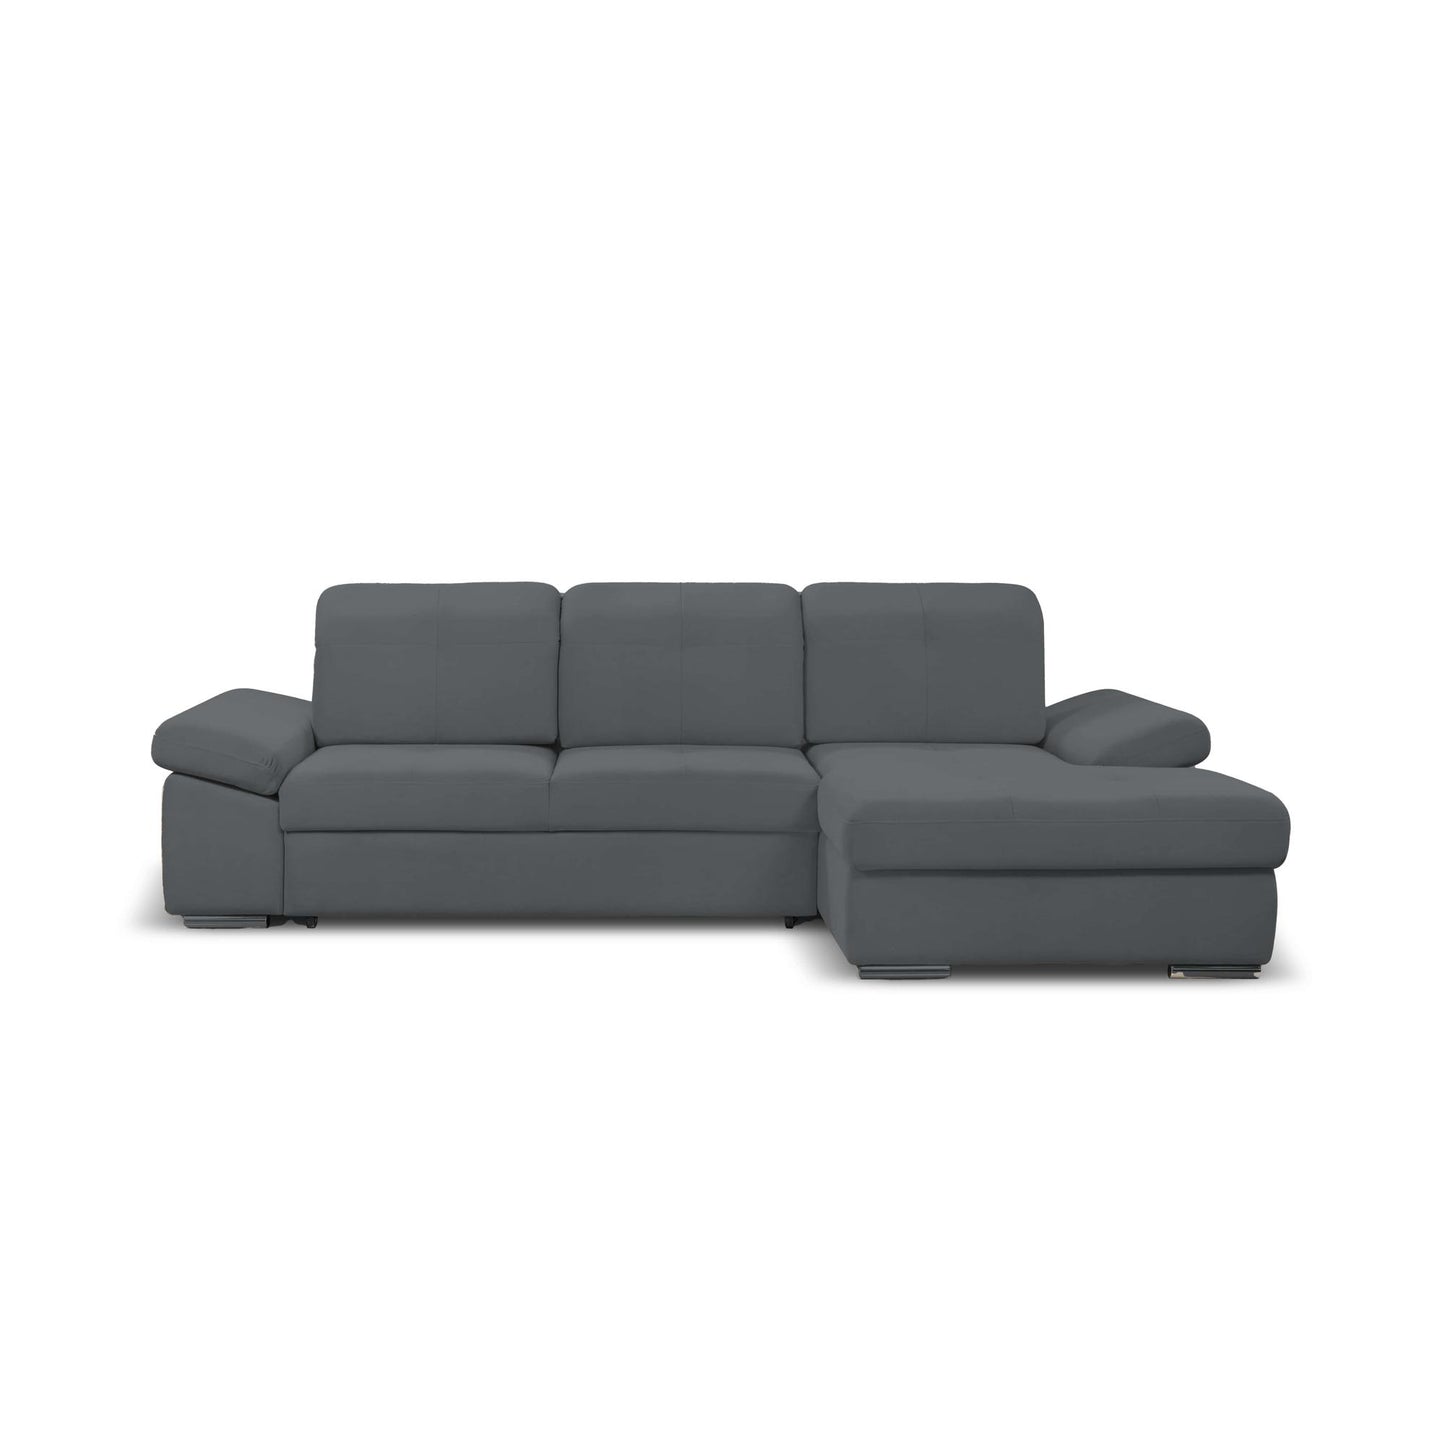 Lion Sectional Sofa Sleeper in Perfect Dark Gray